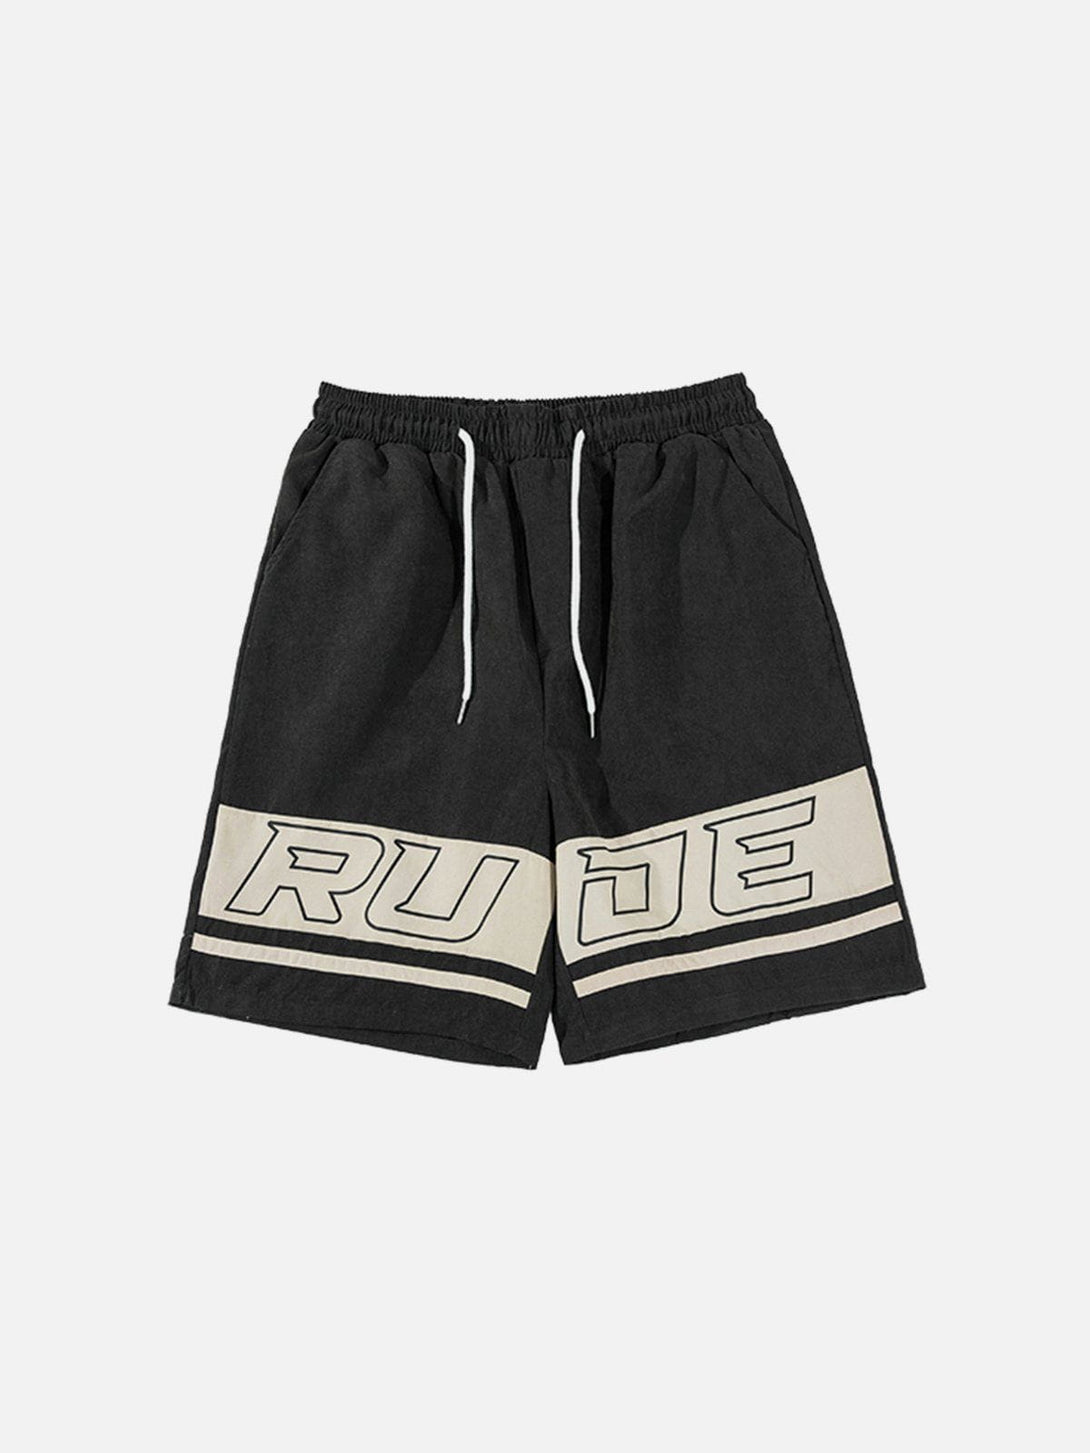 Majesda® - Letters Shorts outfit ideas streetwear fashion